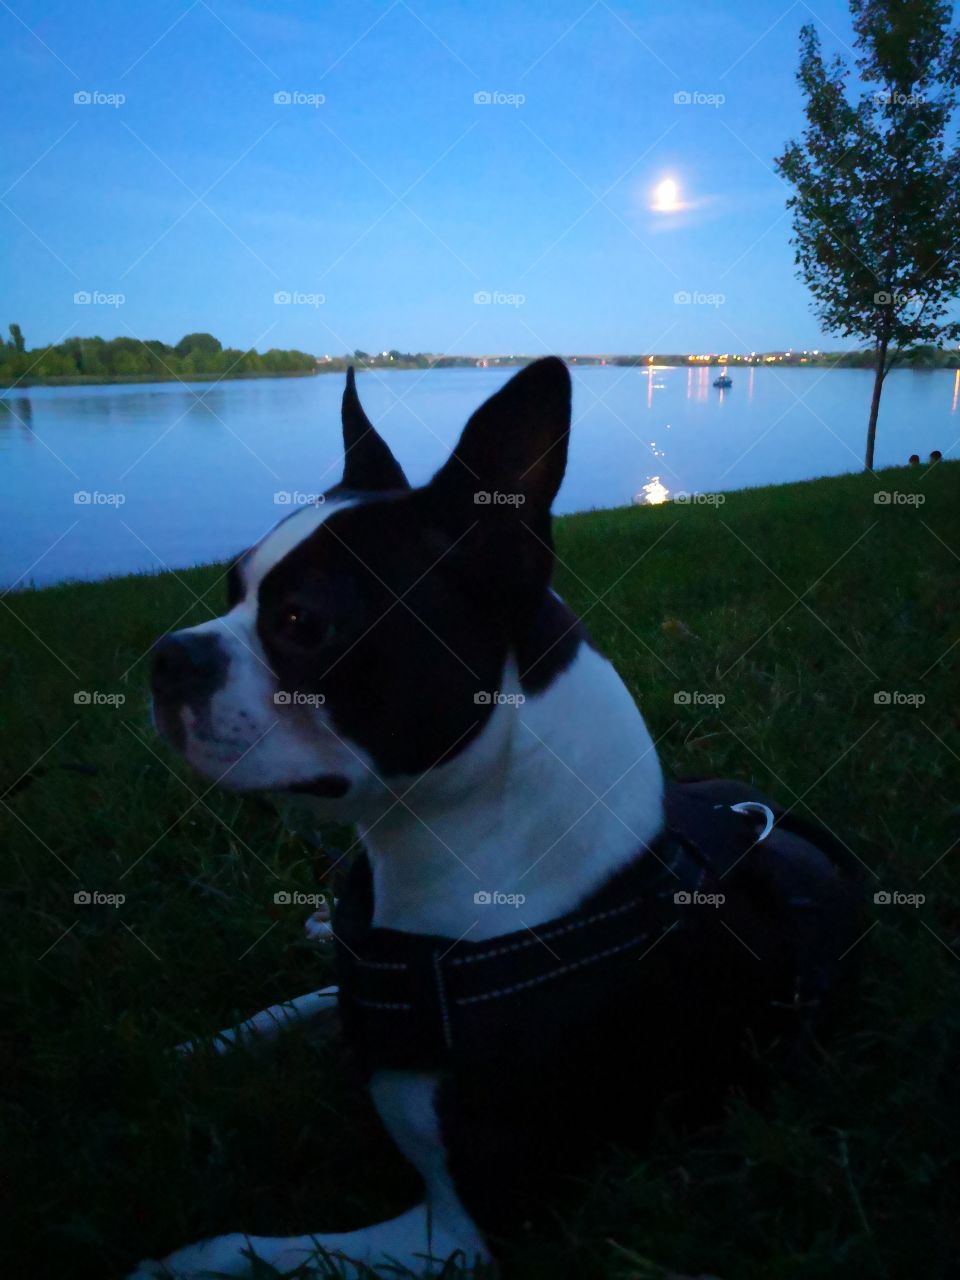 bozo the Boston Terrier enjoying the evening at Howard Amon park in Richland, WA with a full moon to light up the night.